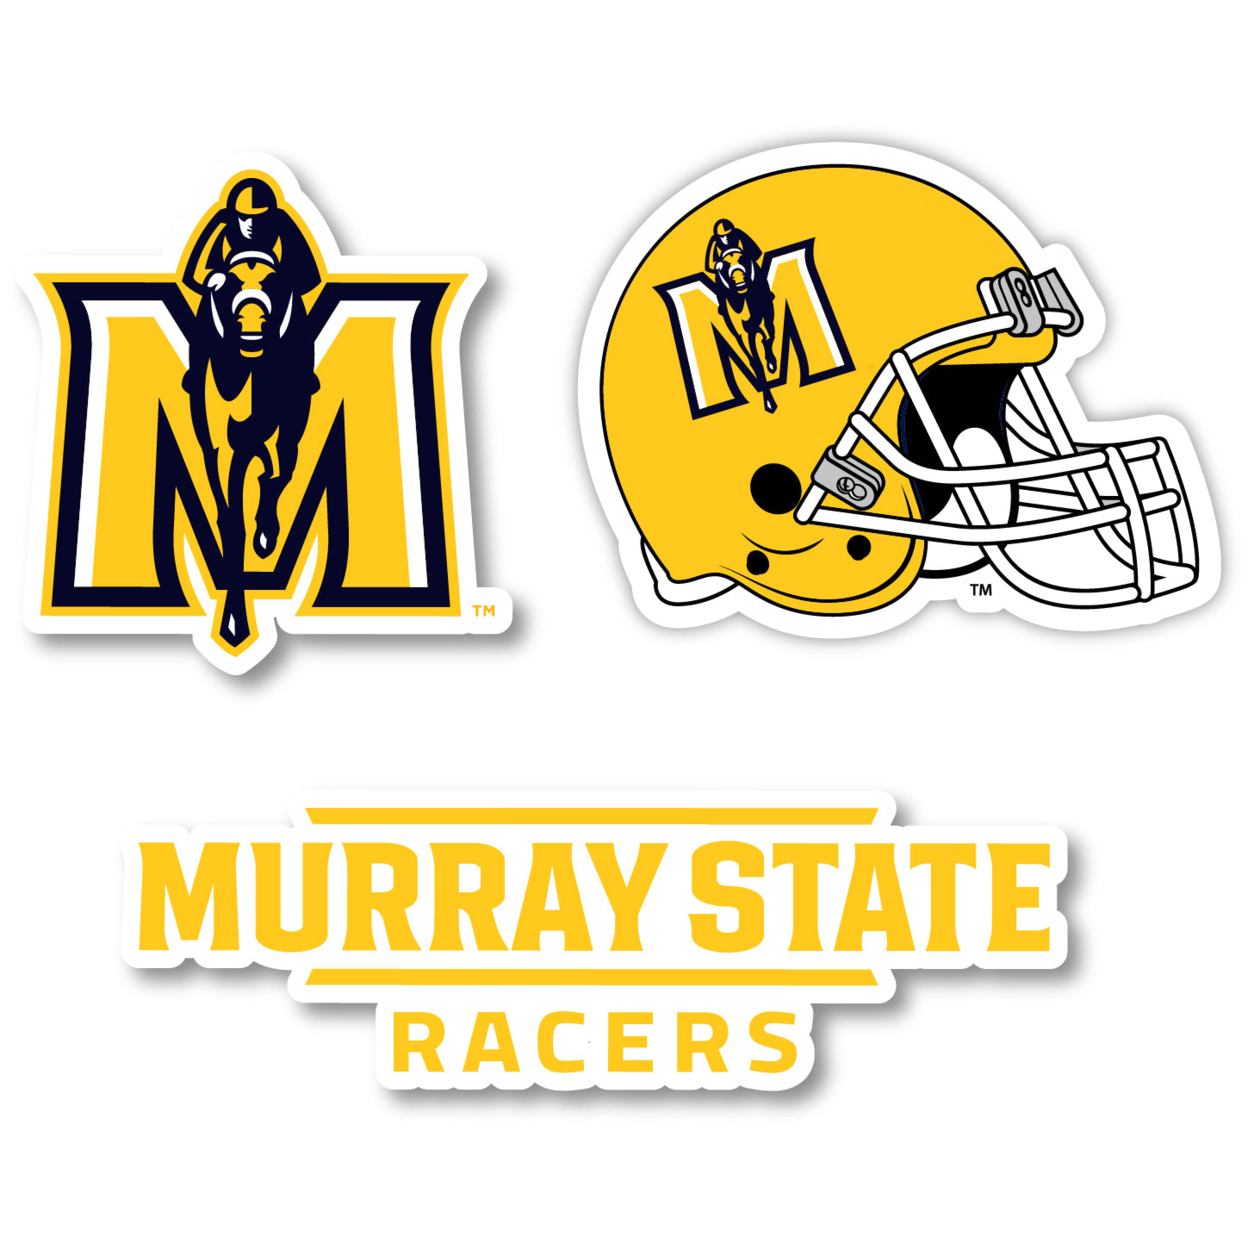 Murray State University Vinyl Decal Sticker 3 Pack 4-Inch Each